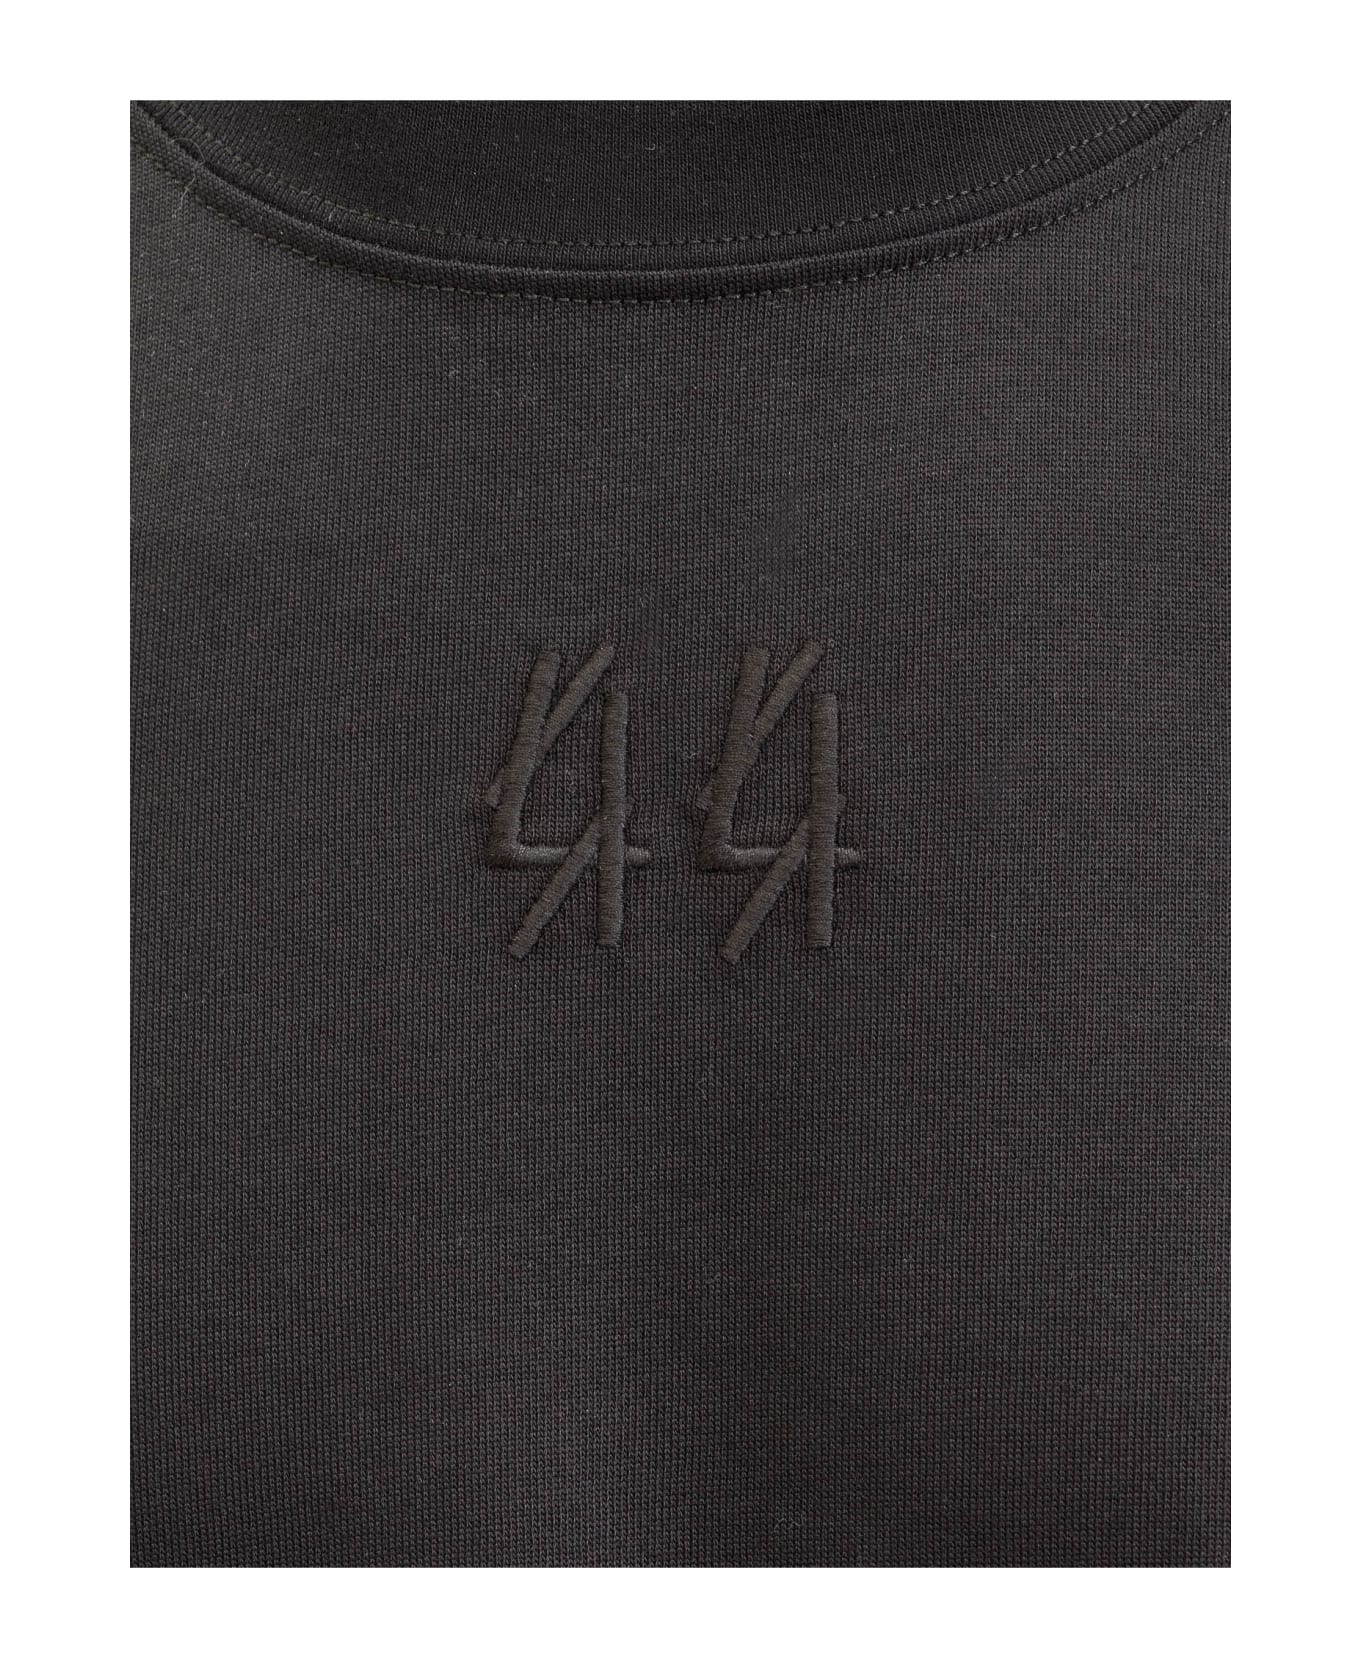 44 Label Group The Enemy T-shirt - BLACK